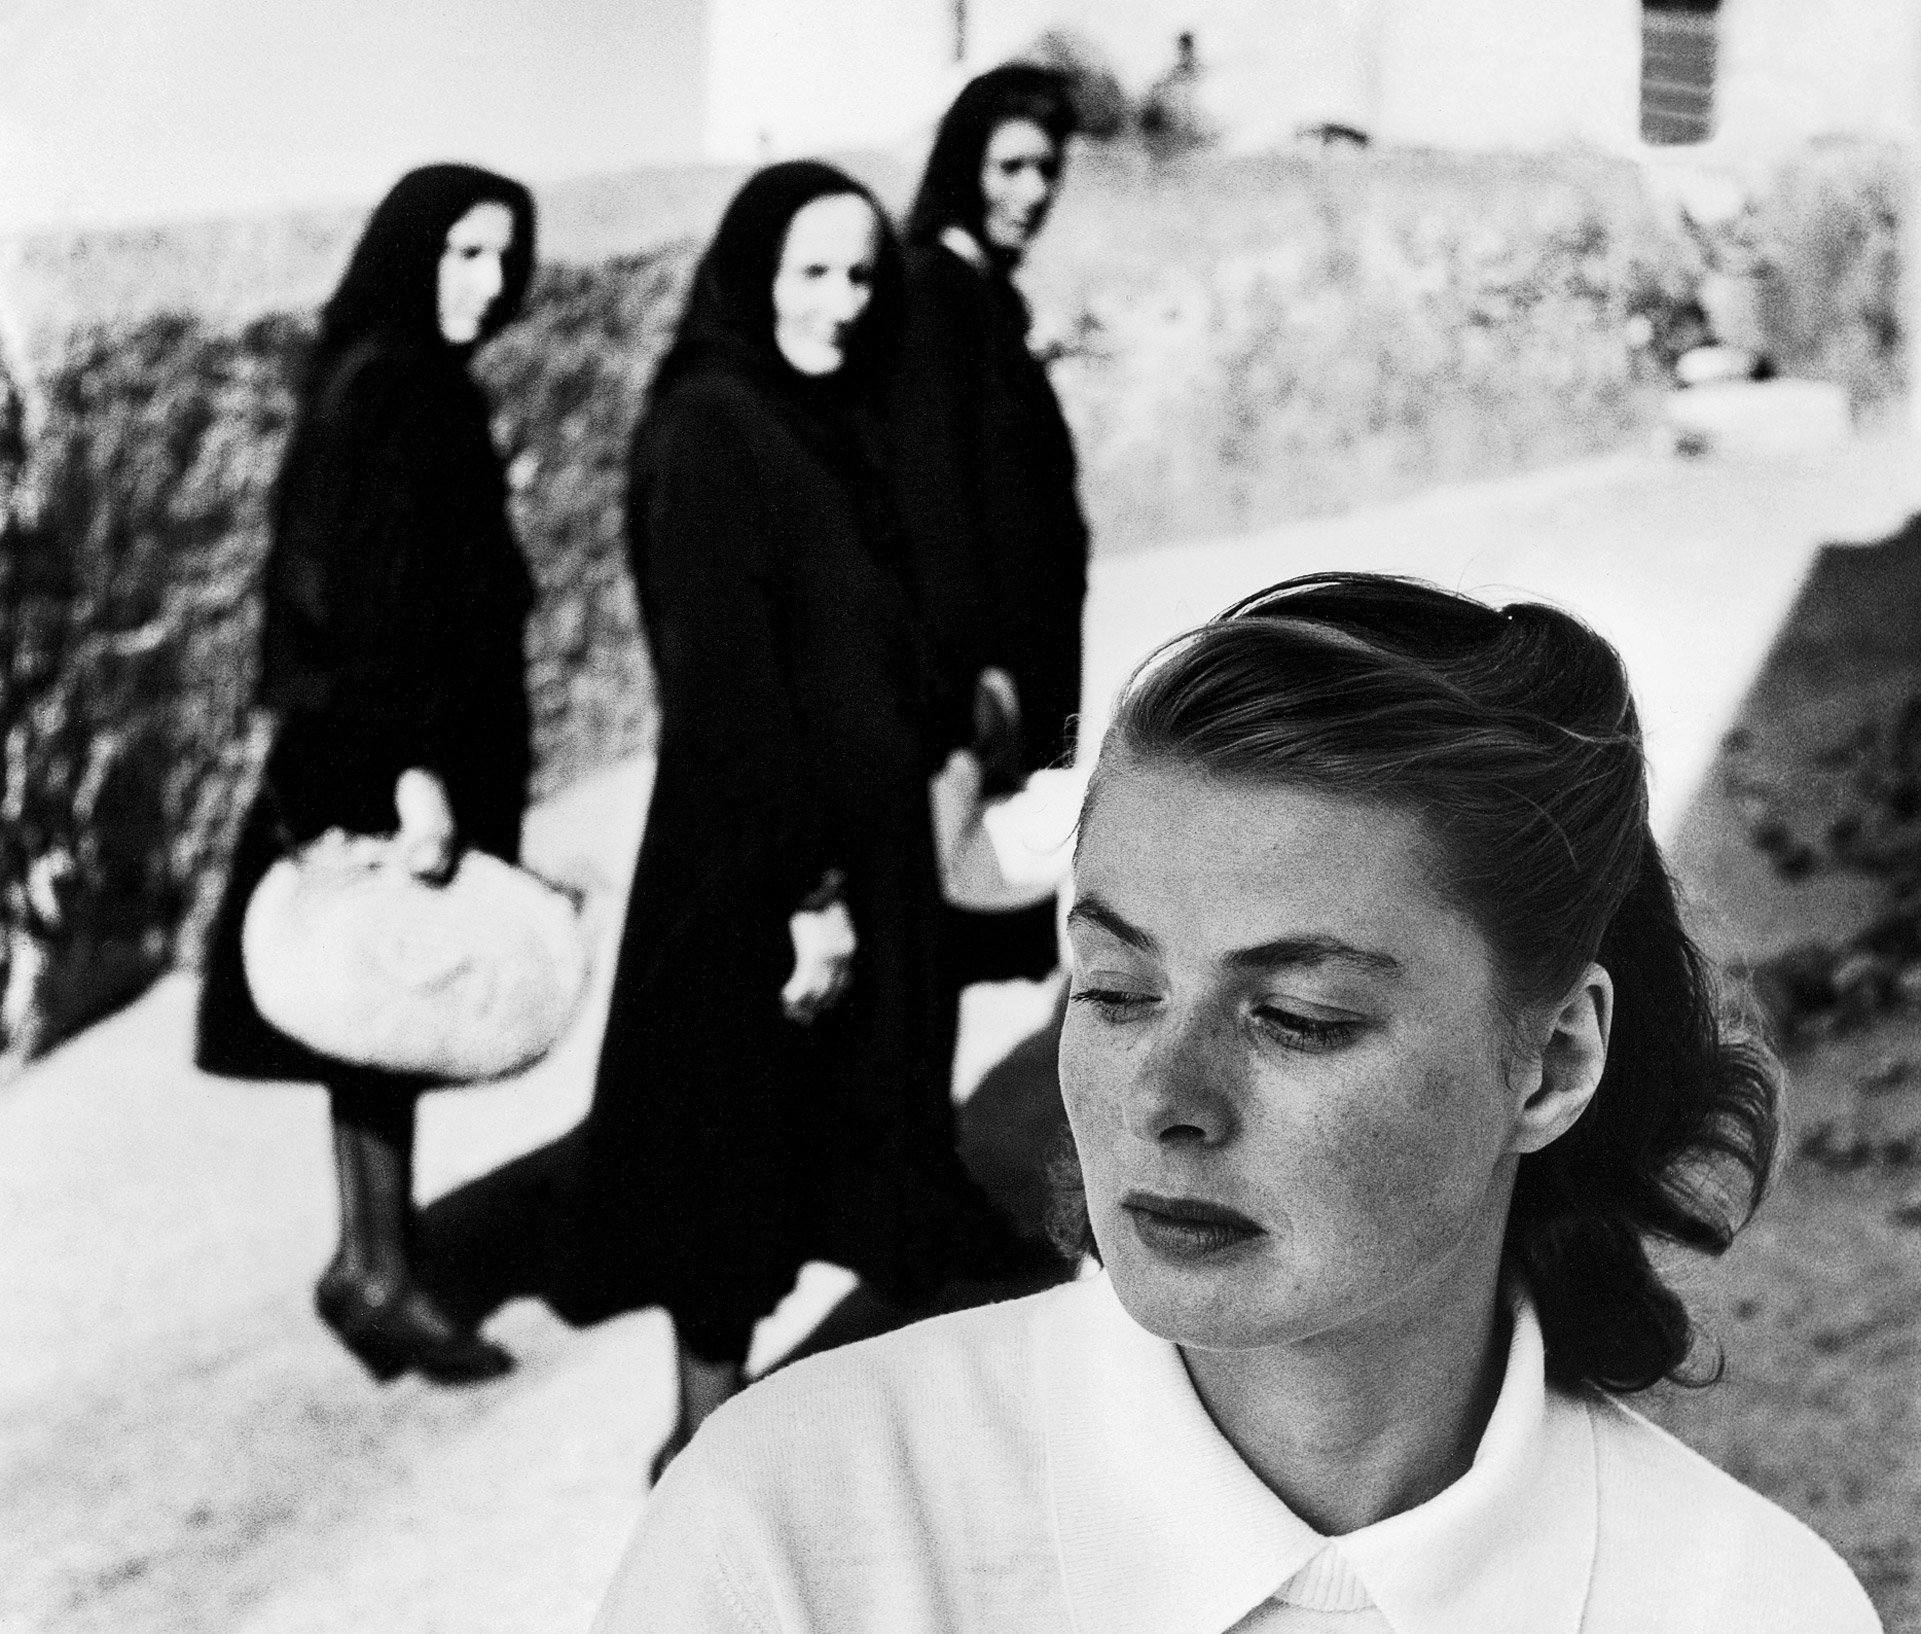 Ingrid Bergman attracts curiosity of local women in the village where she is on location for the film "Stromboli".